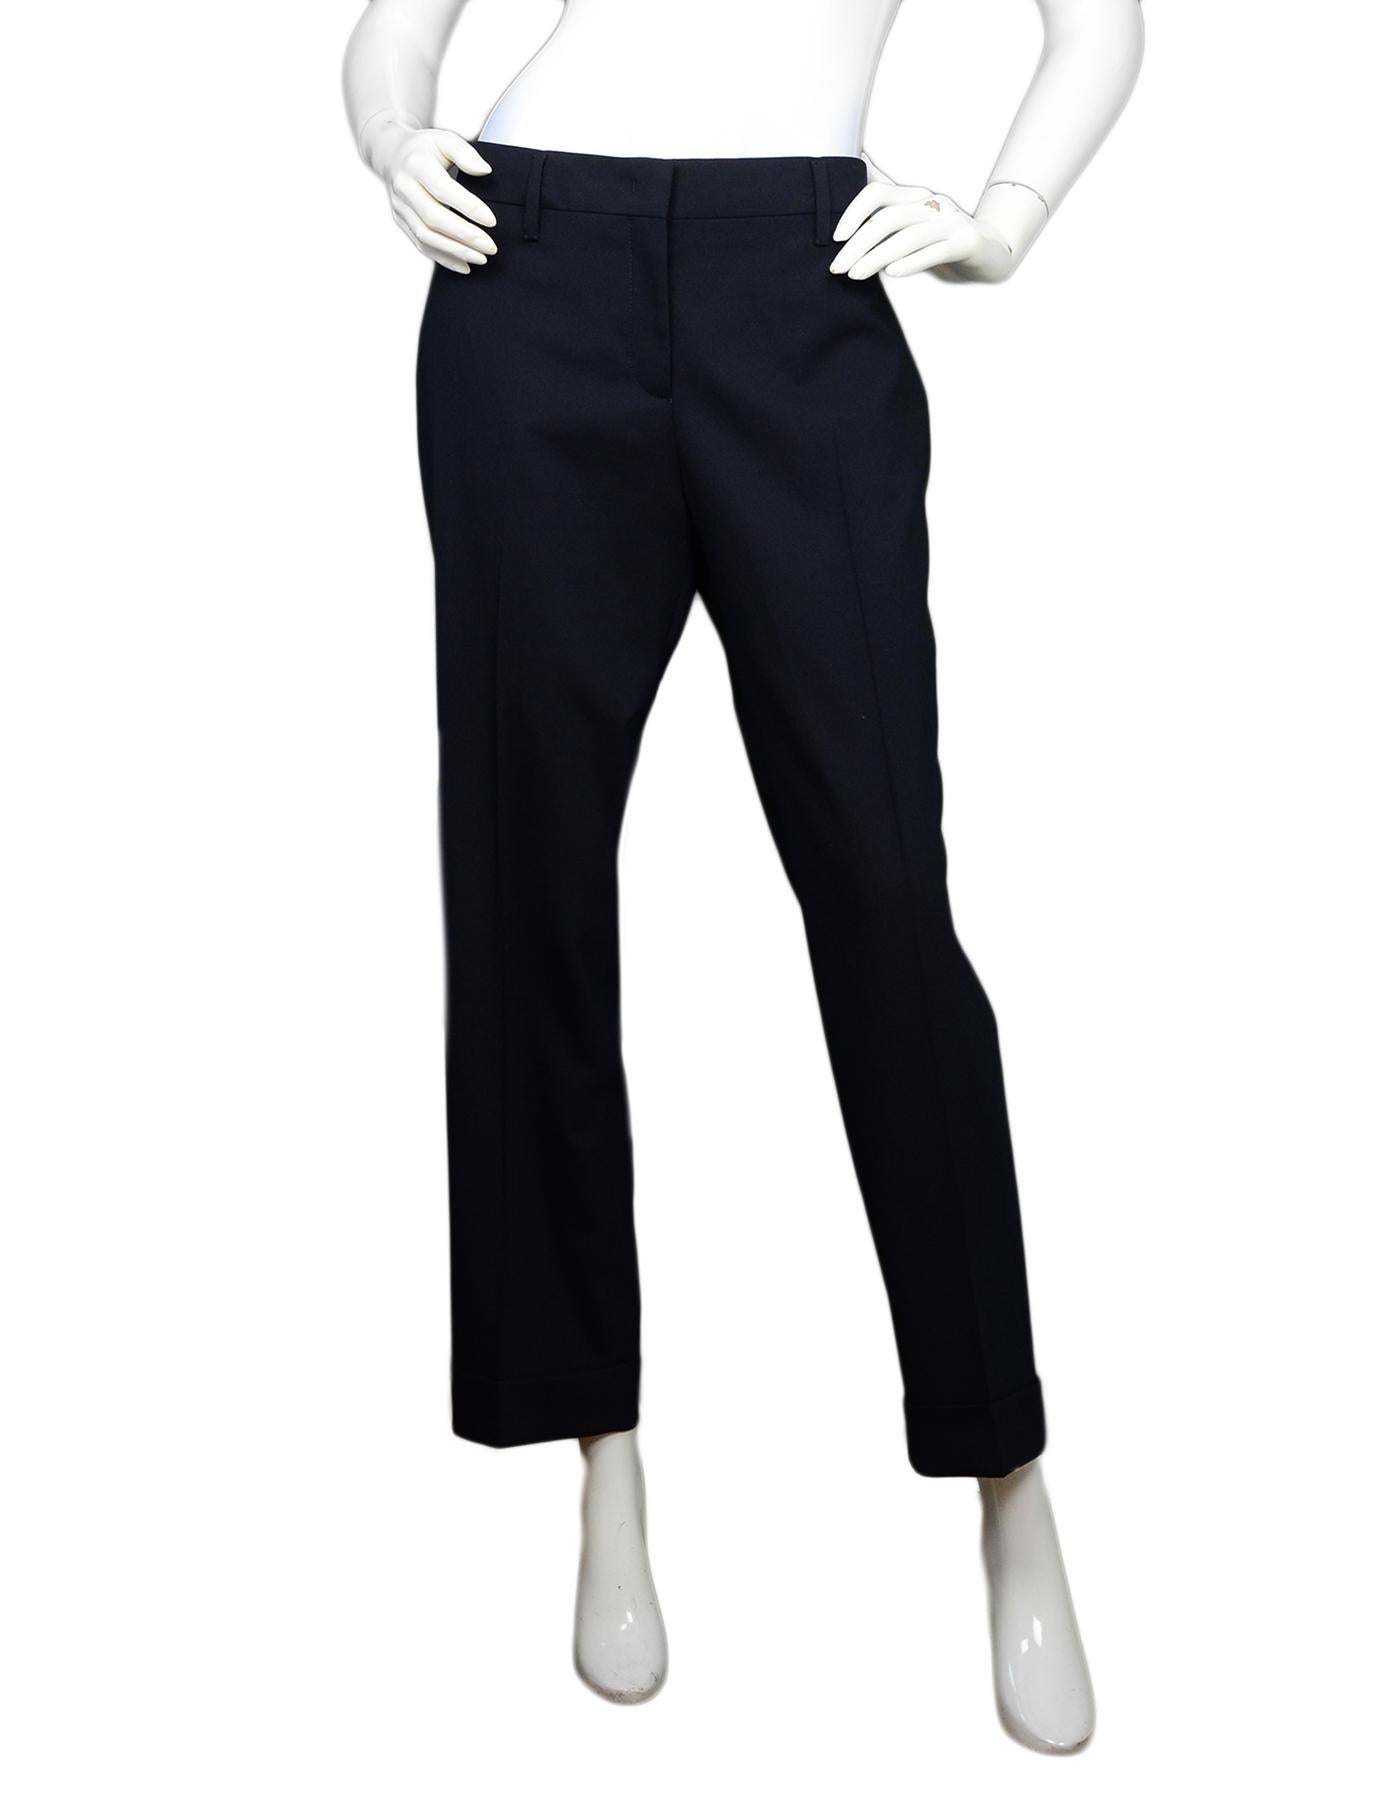 Prada Navy Natte Stretch Wool Trousers NWT Sz IT48/US12

Made In: Romania 
Color: Navy
Materials: 98% wool, 2% elastane 
Closure/Opening: Zipper and button front
Overall Condition: Excellent condition with original tags attached 
Estimated Retail: